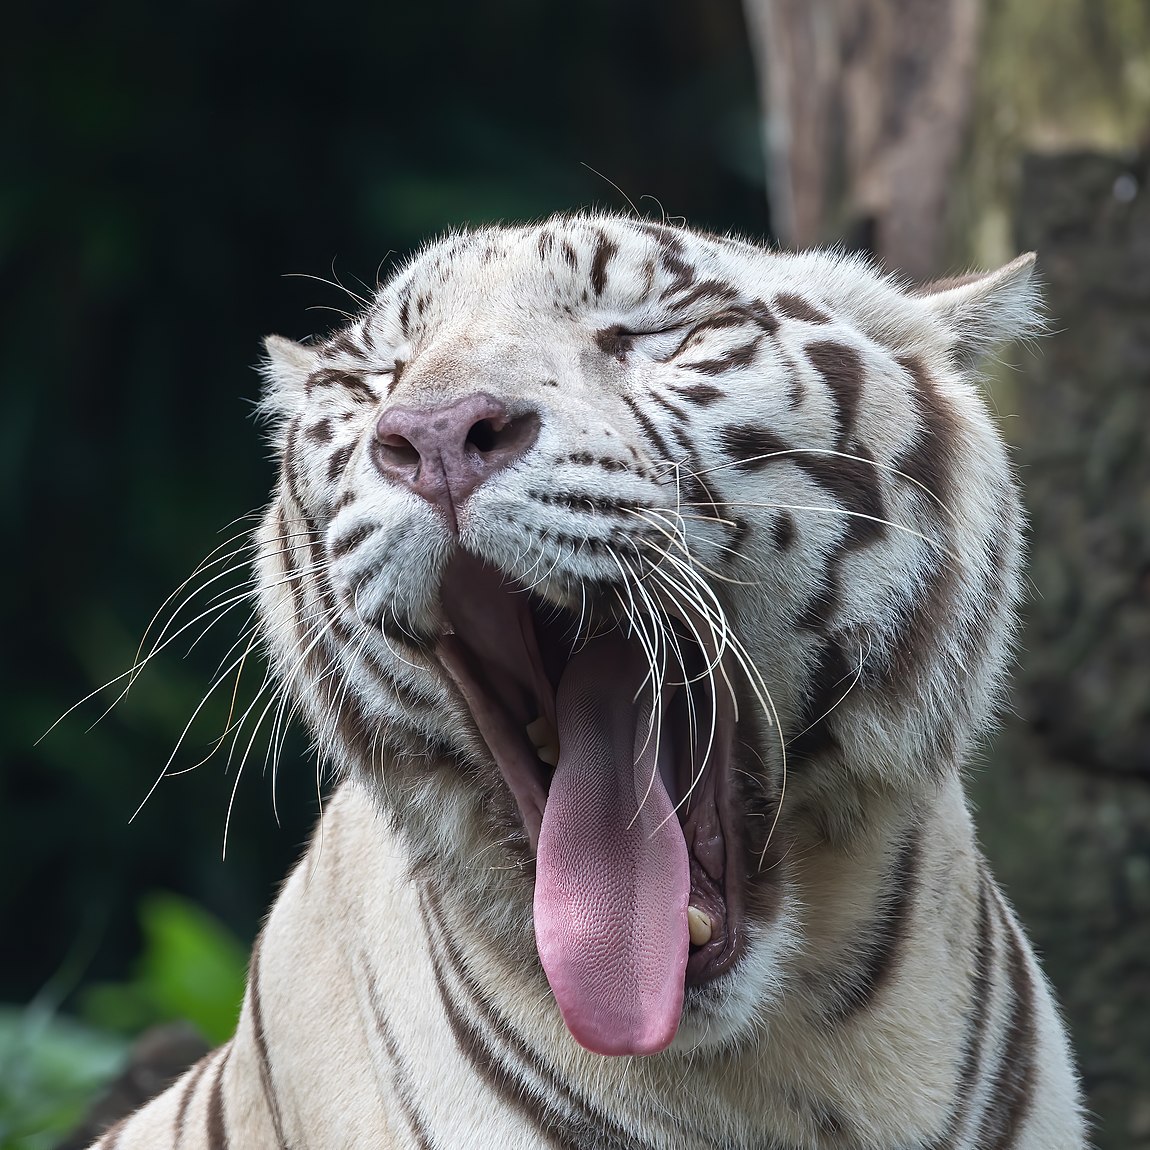 Close-up view of the head of a white tiger, yawning with the tongue out